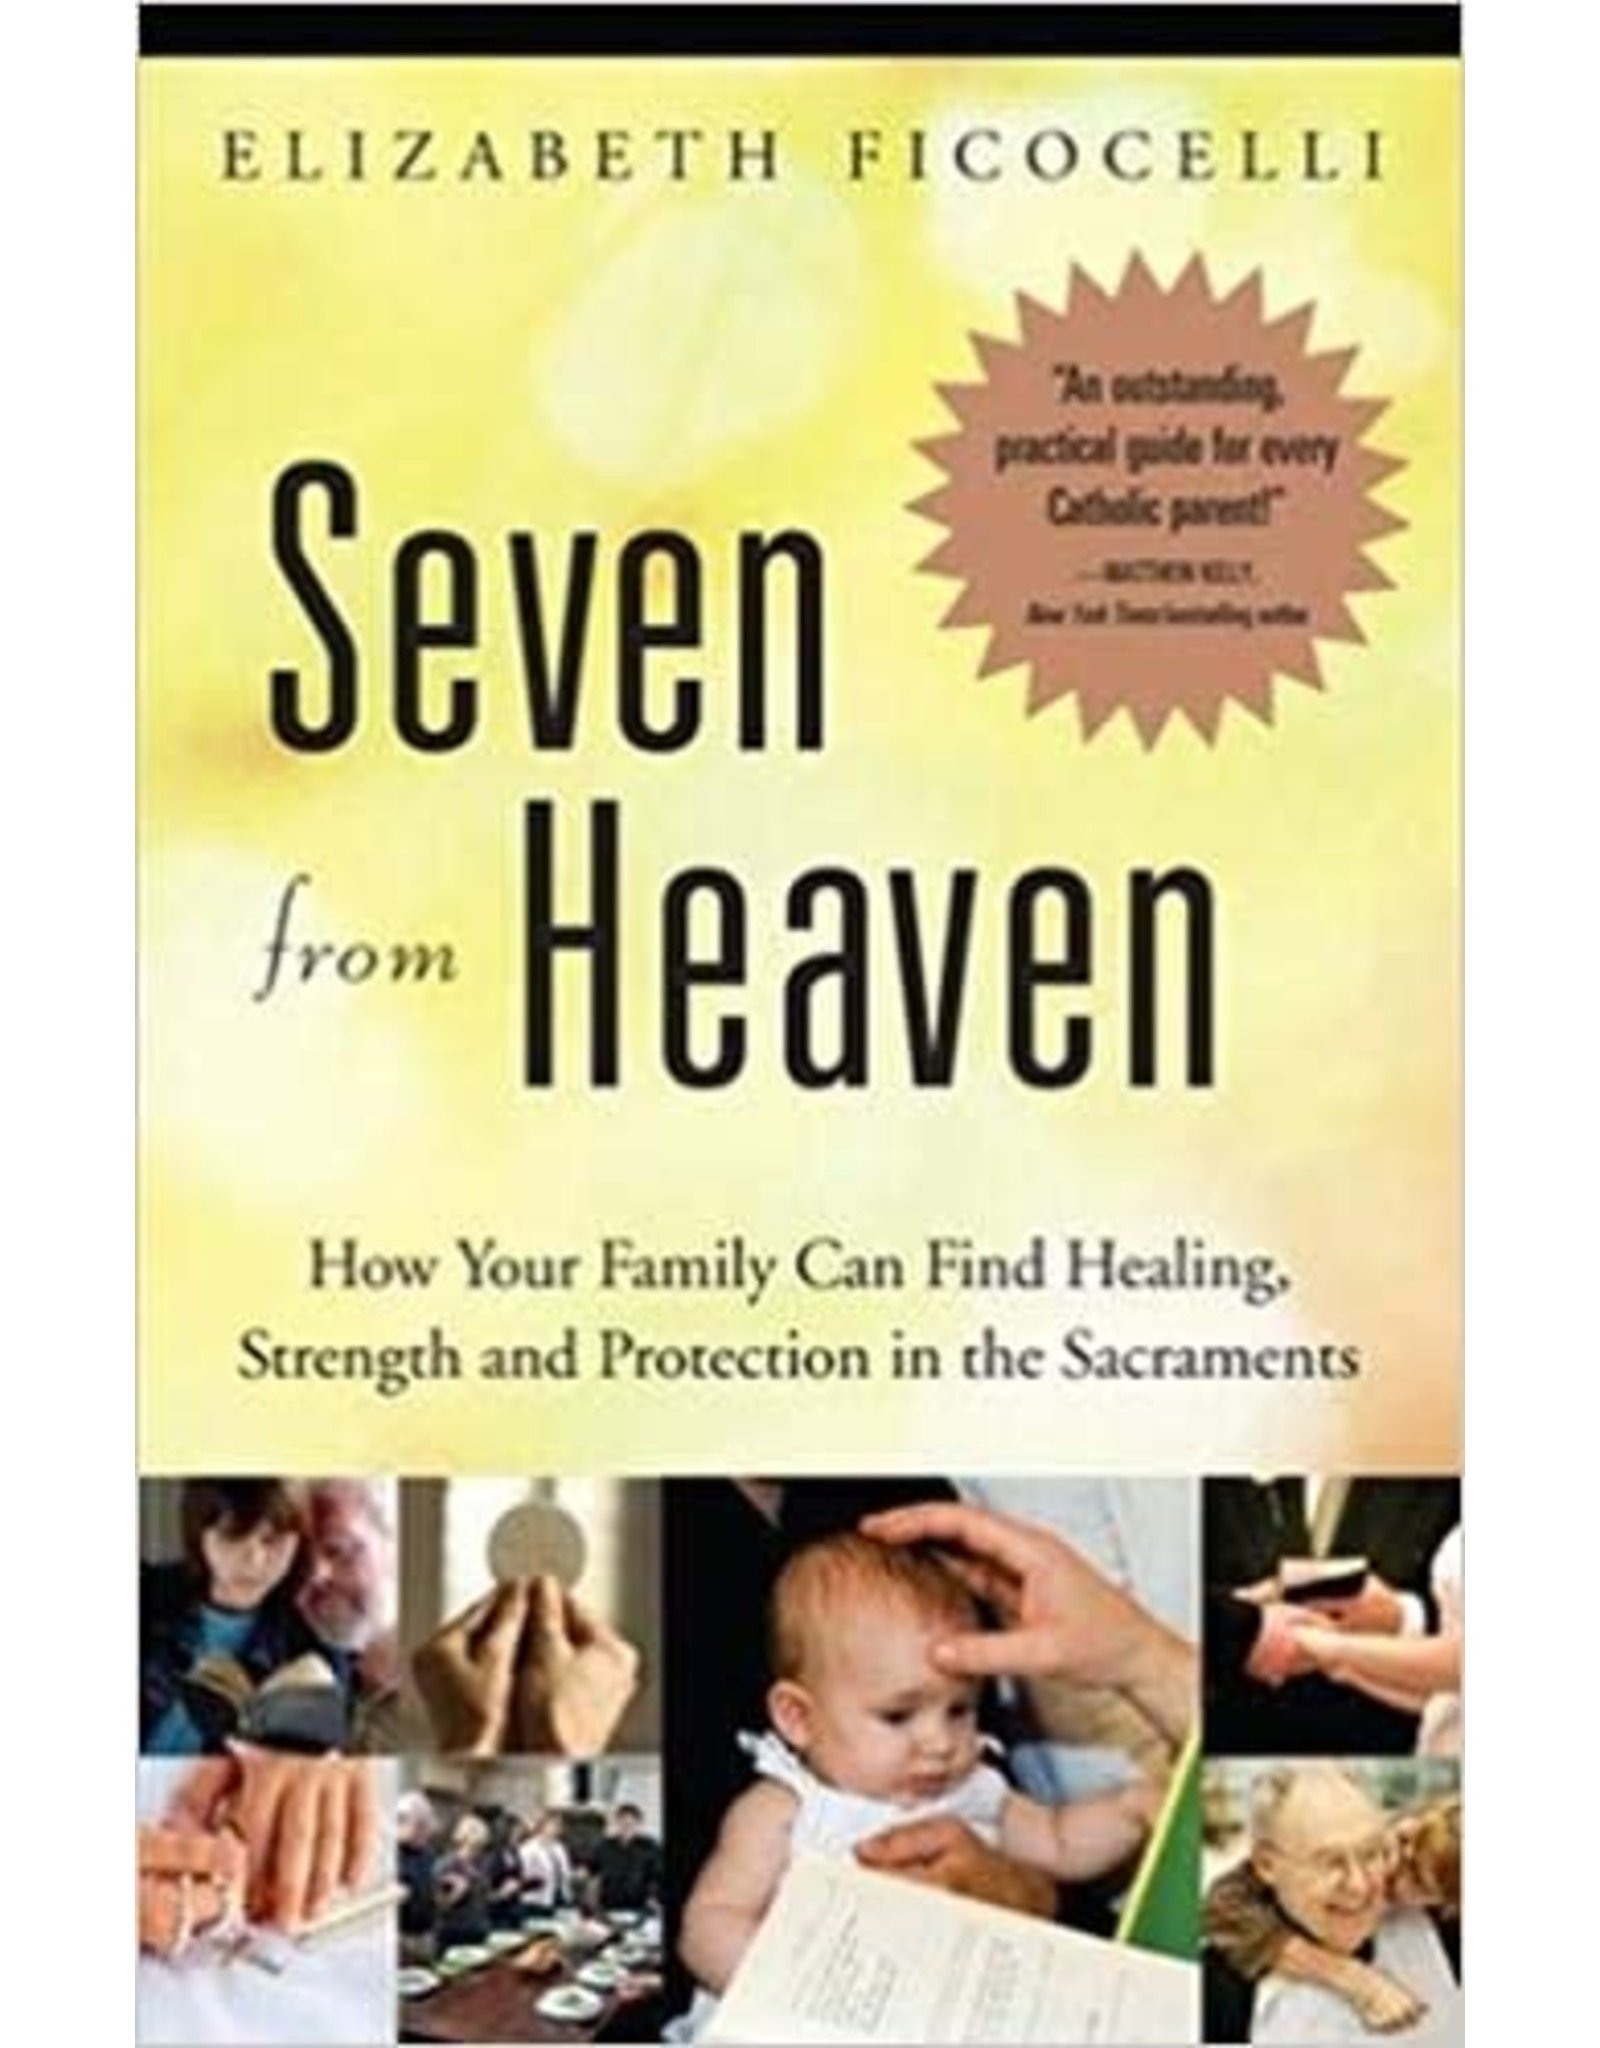 Seven from Heaven: How Your Family Can Find Healing, Strength and Protection in the Sacraments